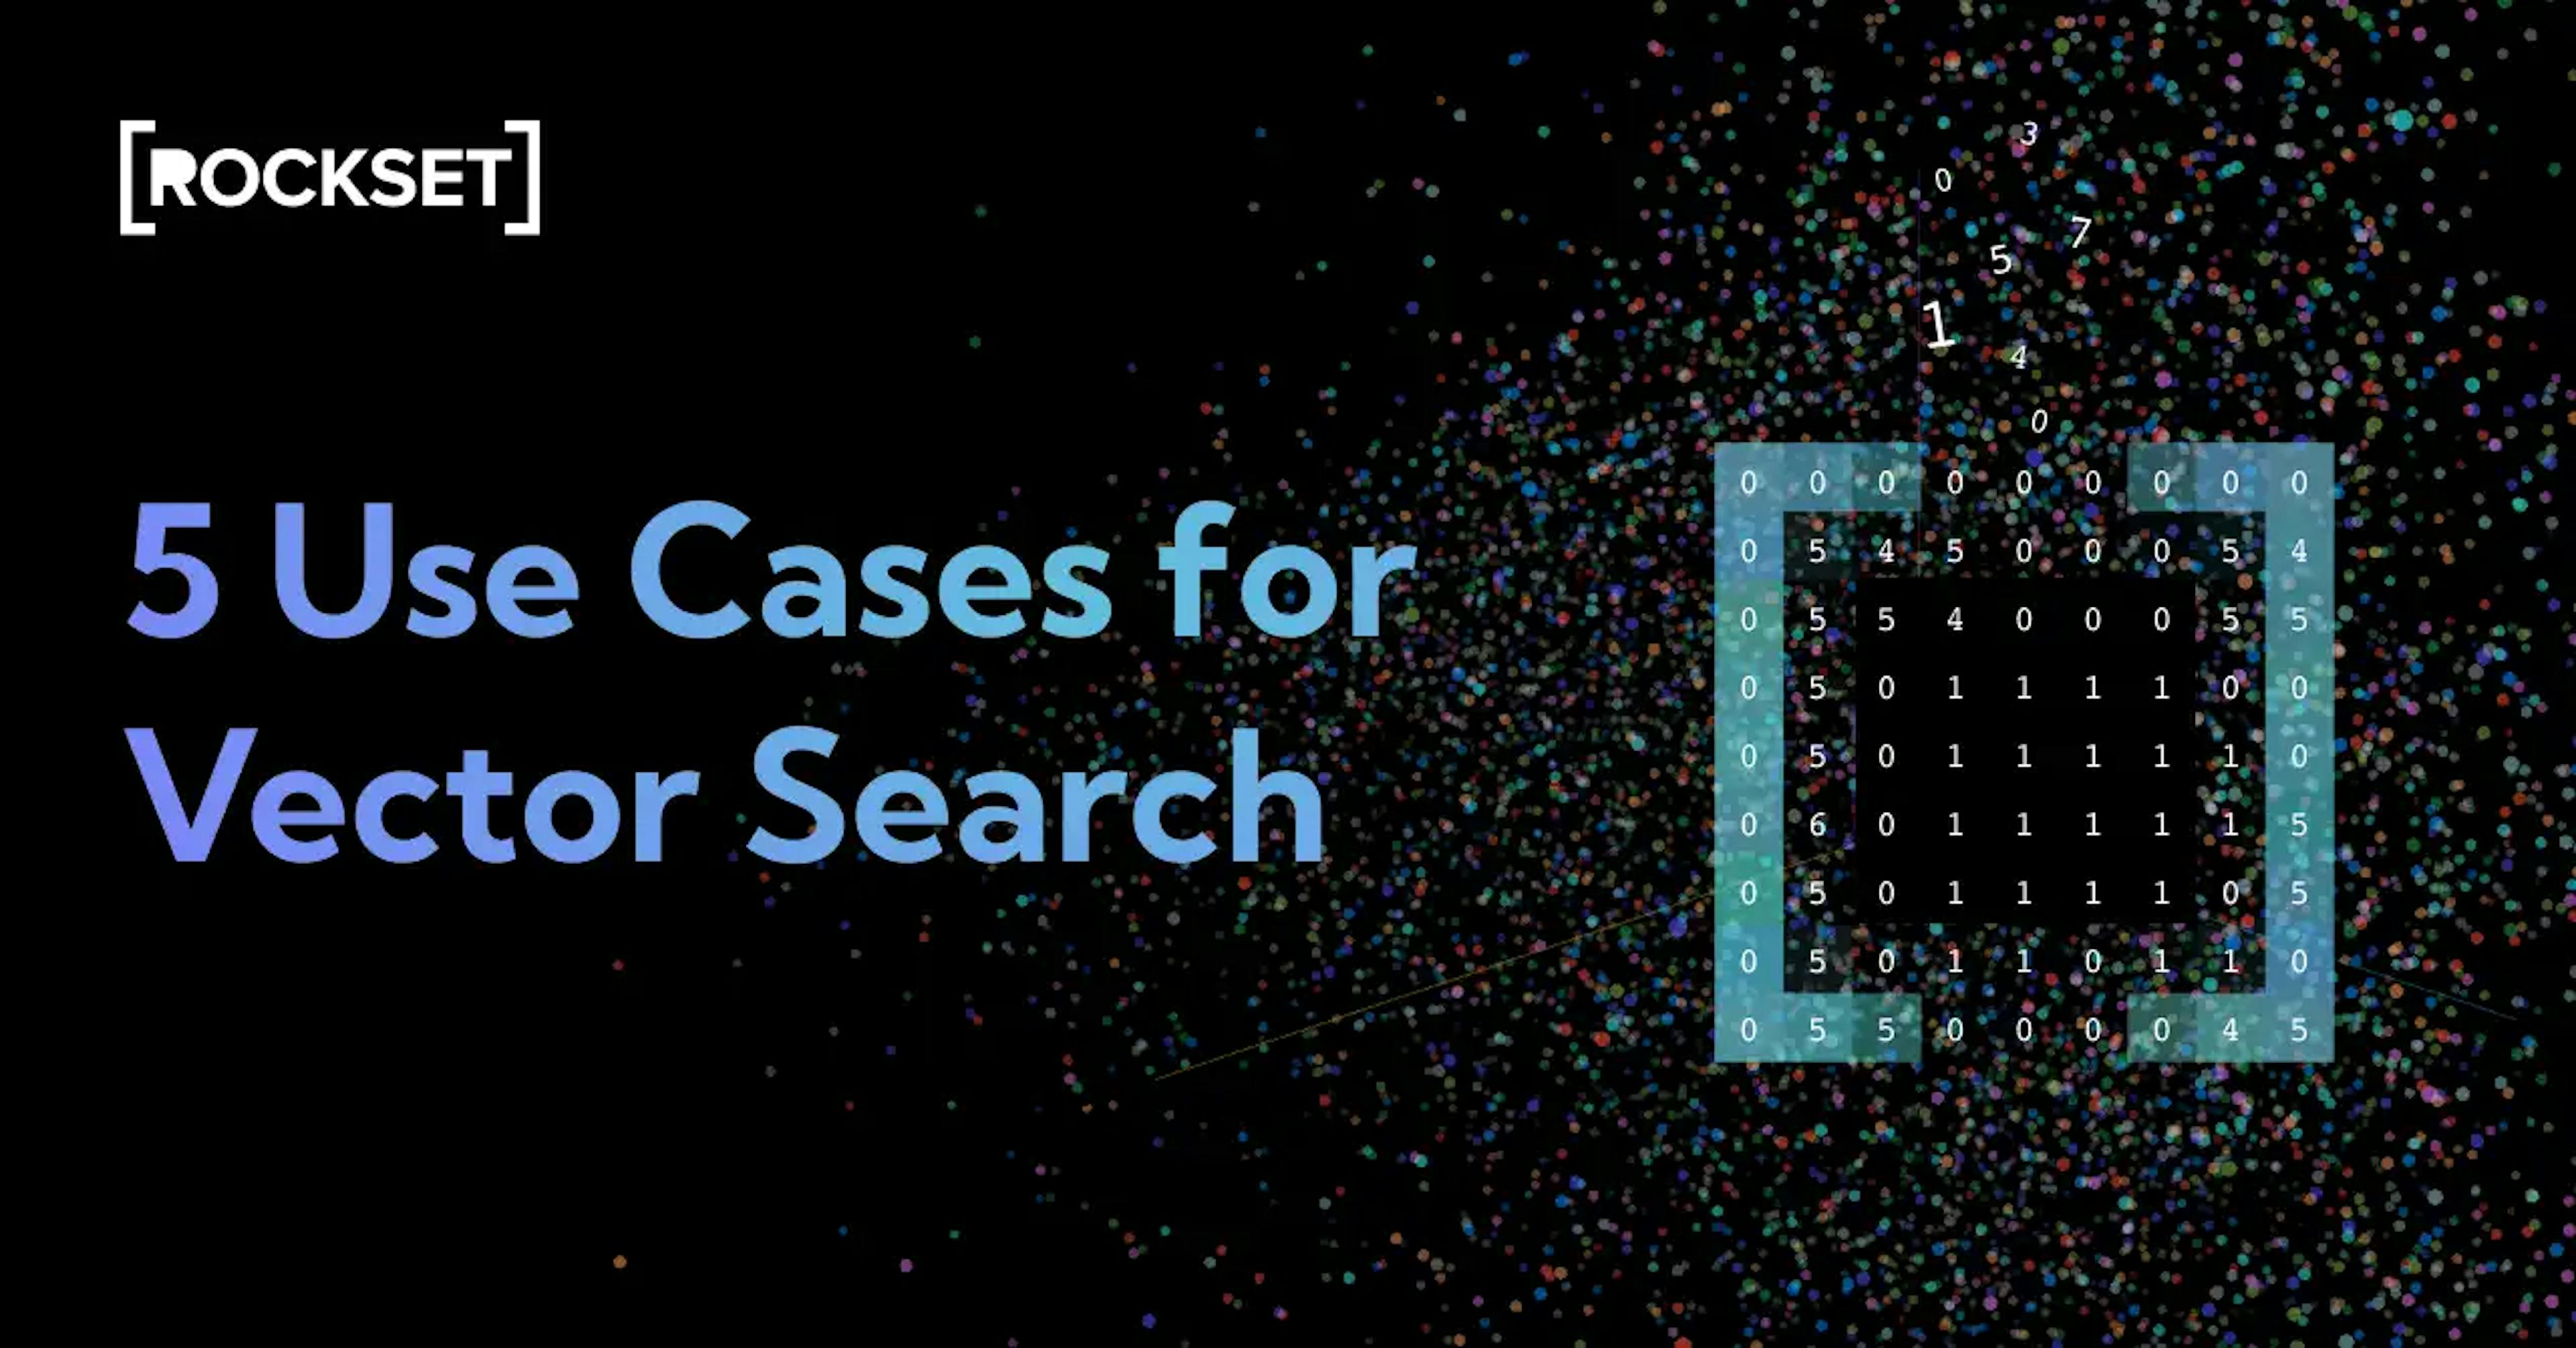 /a-look-into-5-use-cases-for-vector-search-from-major-tech-companies feature image